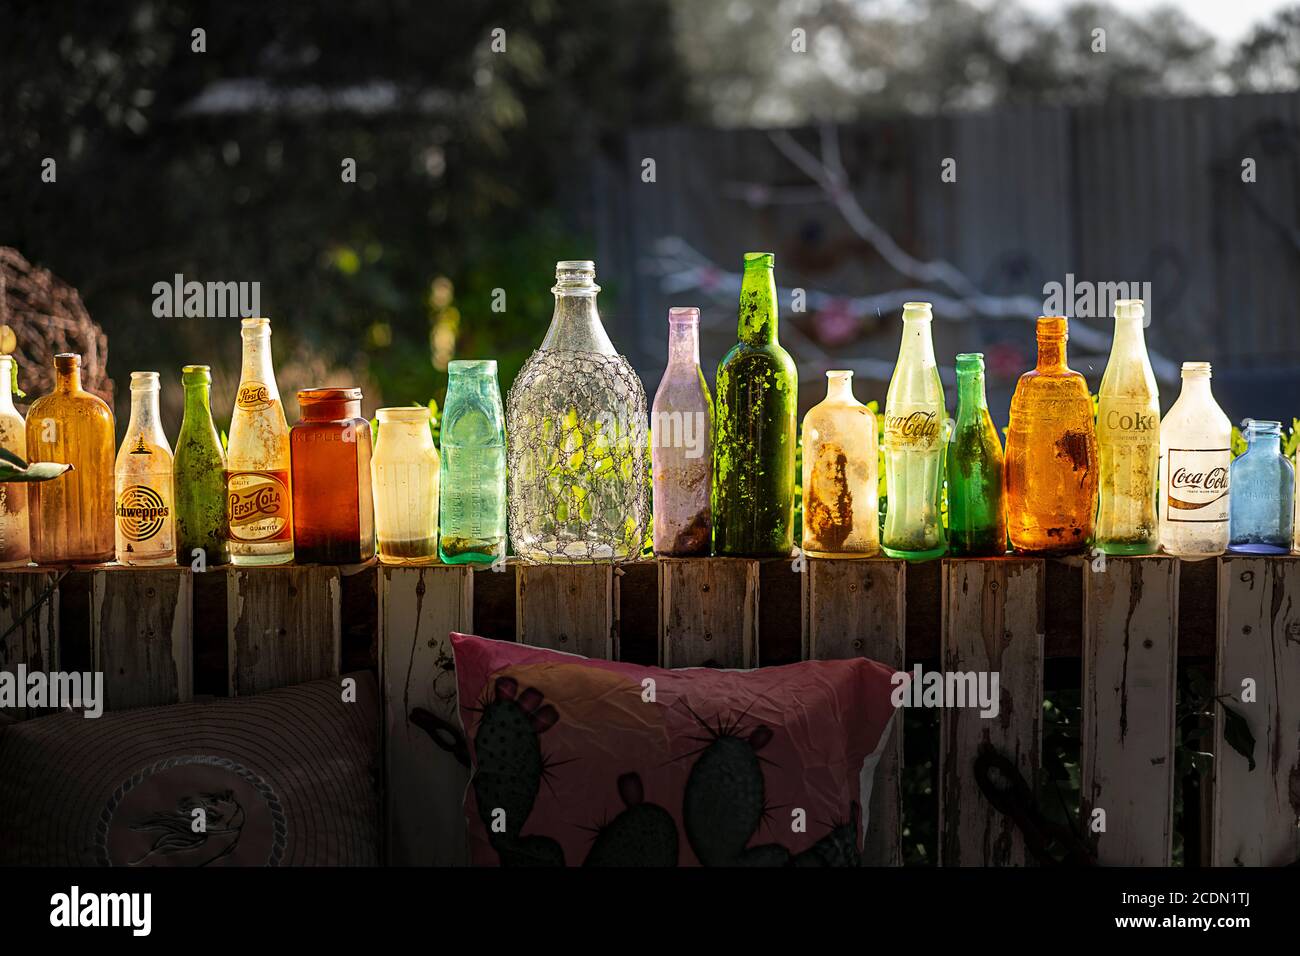 Collection of antique bottles on display Stock Photo